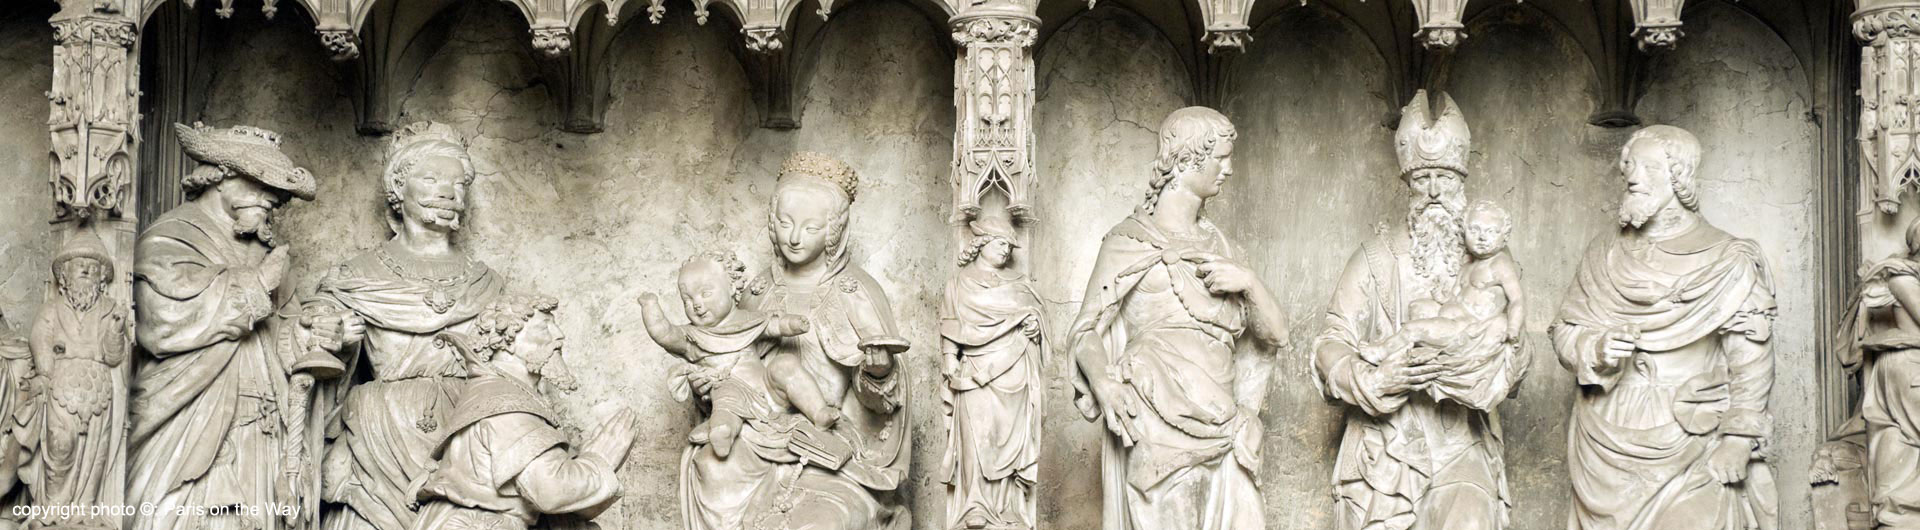 CHARTRES LOW RELIEF SCULPTURE